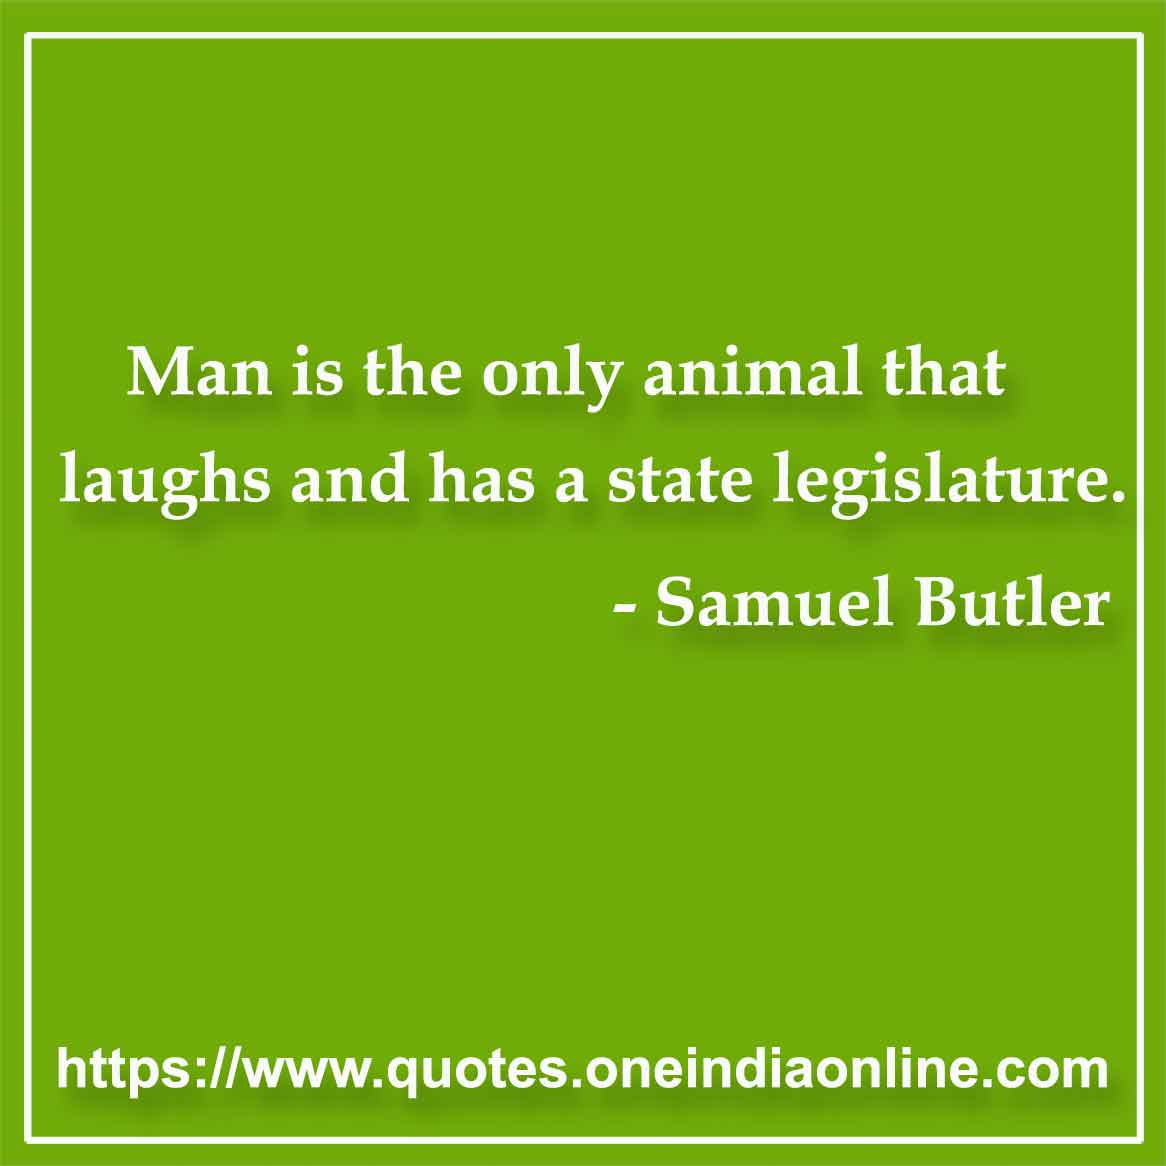 Man is the only animal that laughs and has a state legislature.

- Samuel Butler Quotes